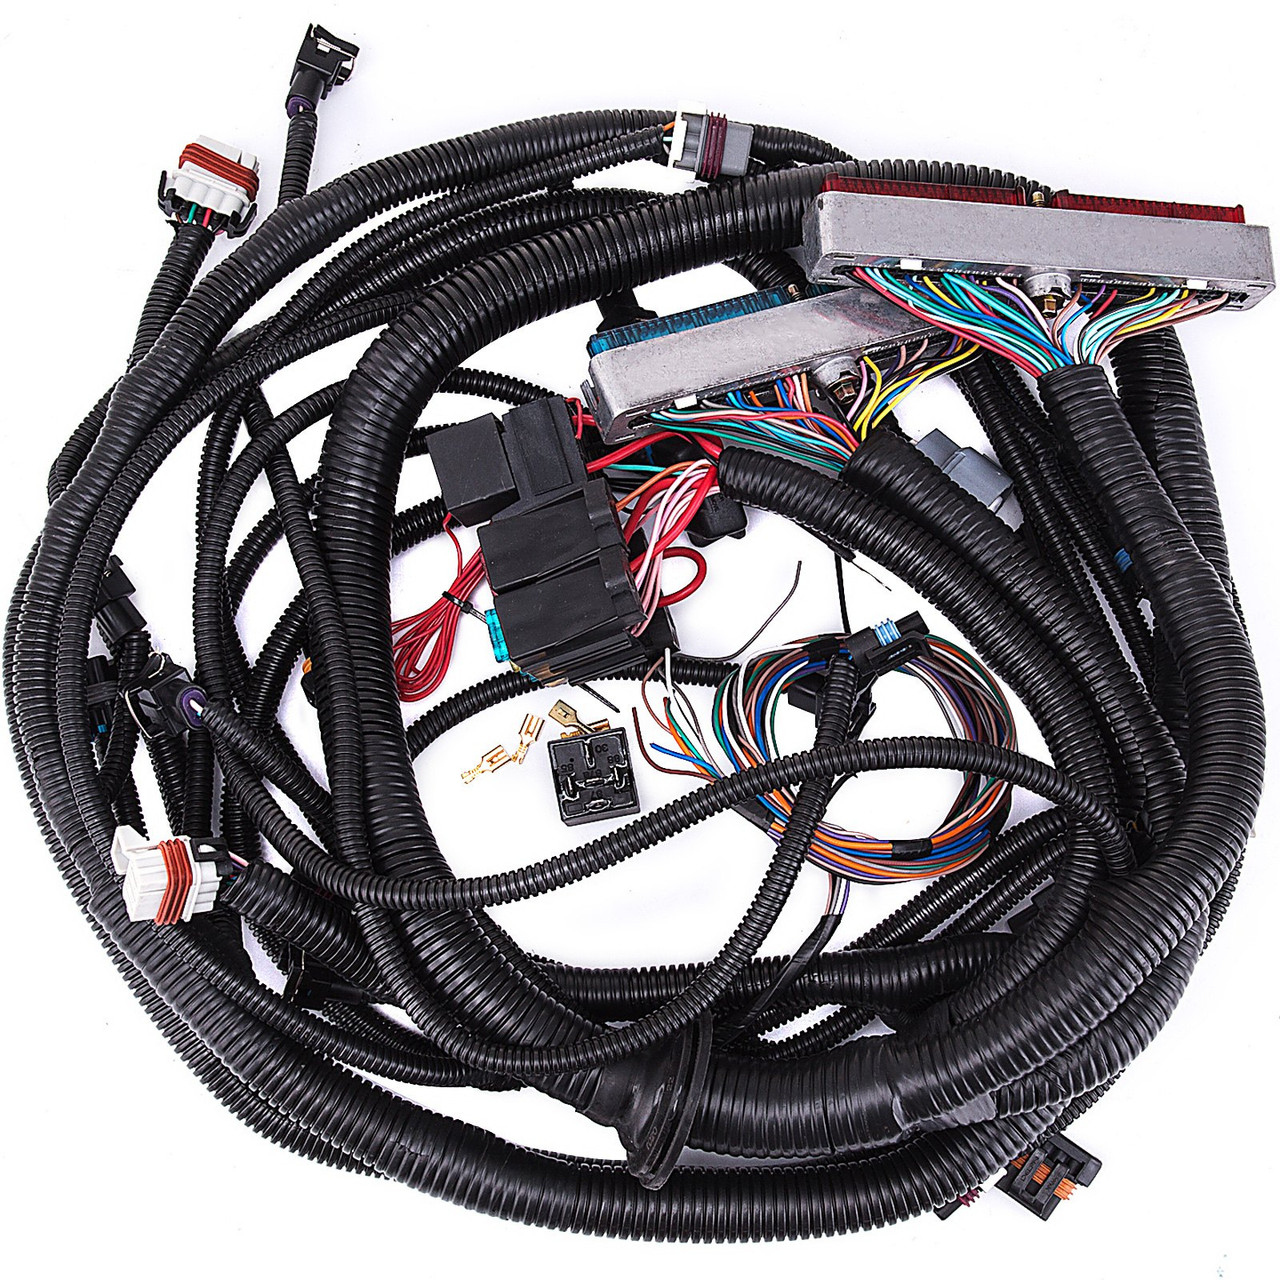 97-02 DBC LS1 LS6 Standalone Wiring Harness for 1997-2002 LS-LSX Engines with RPO Code LS1 LS6 4L60E Transmission